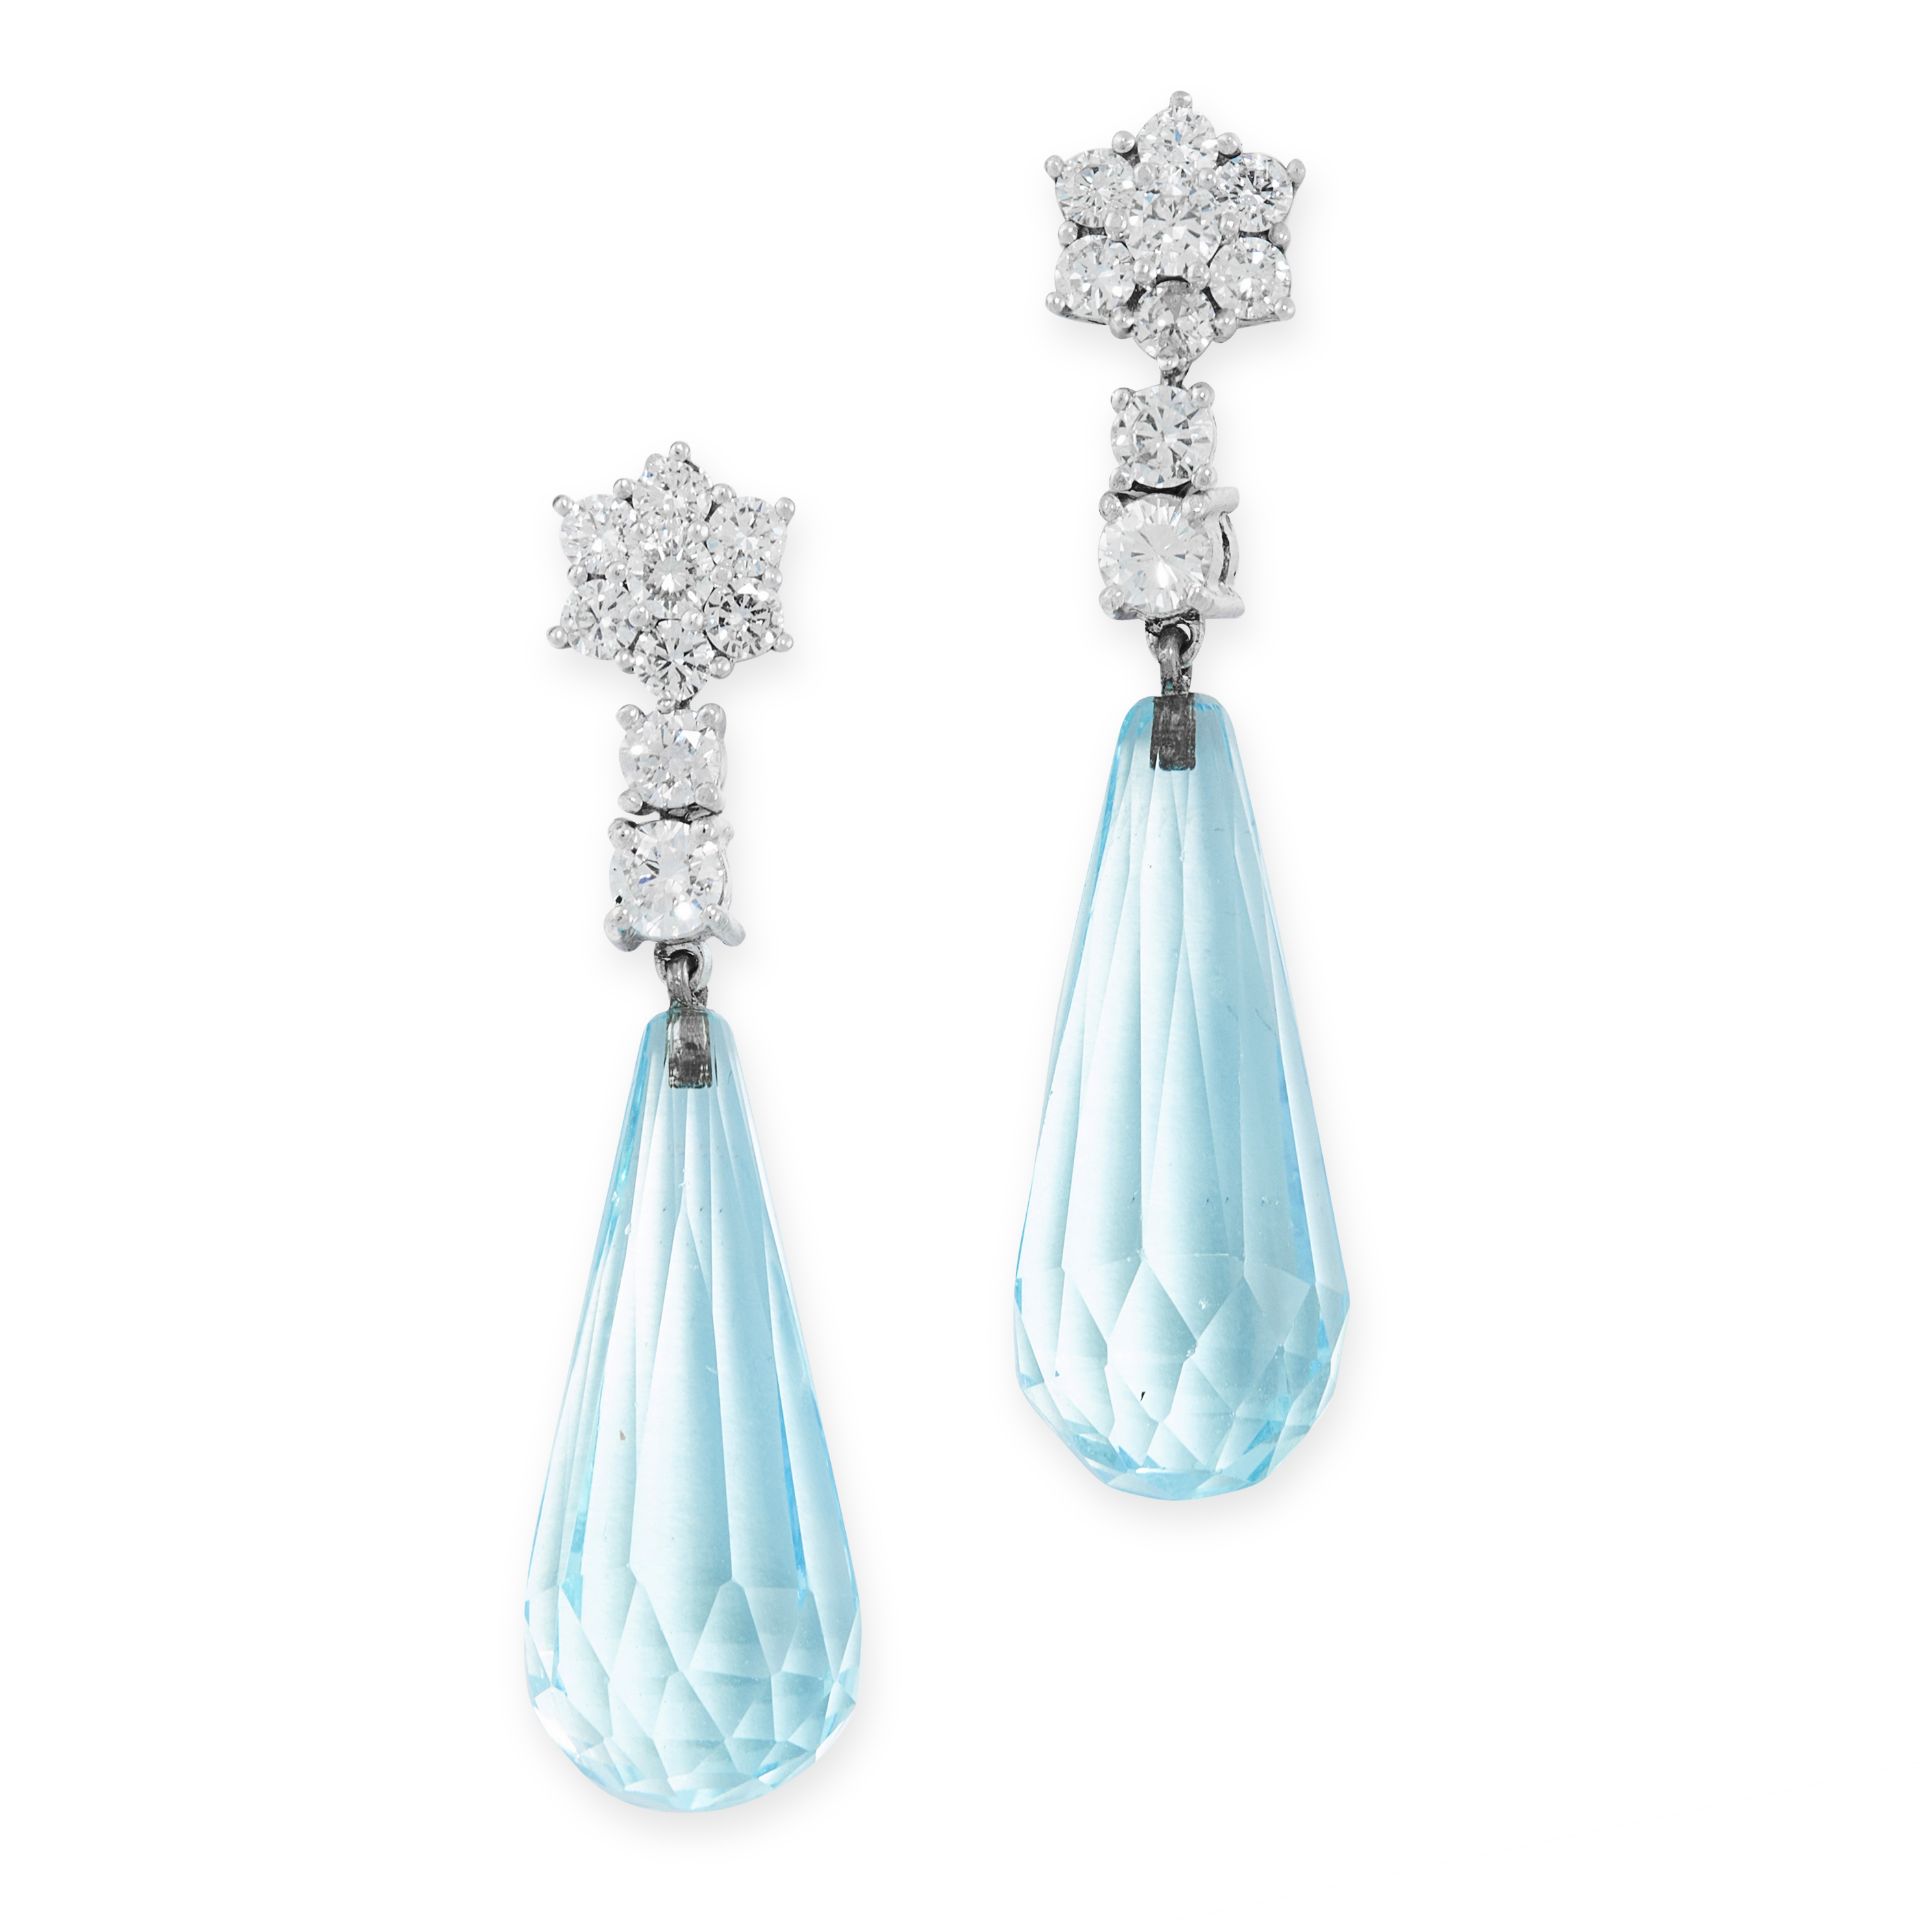 A PAIR OF AQUAMARINE AND DIAMOND EARRINGS in 18ct white gold, each set with a tapering briolette cut